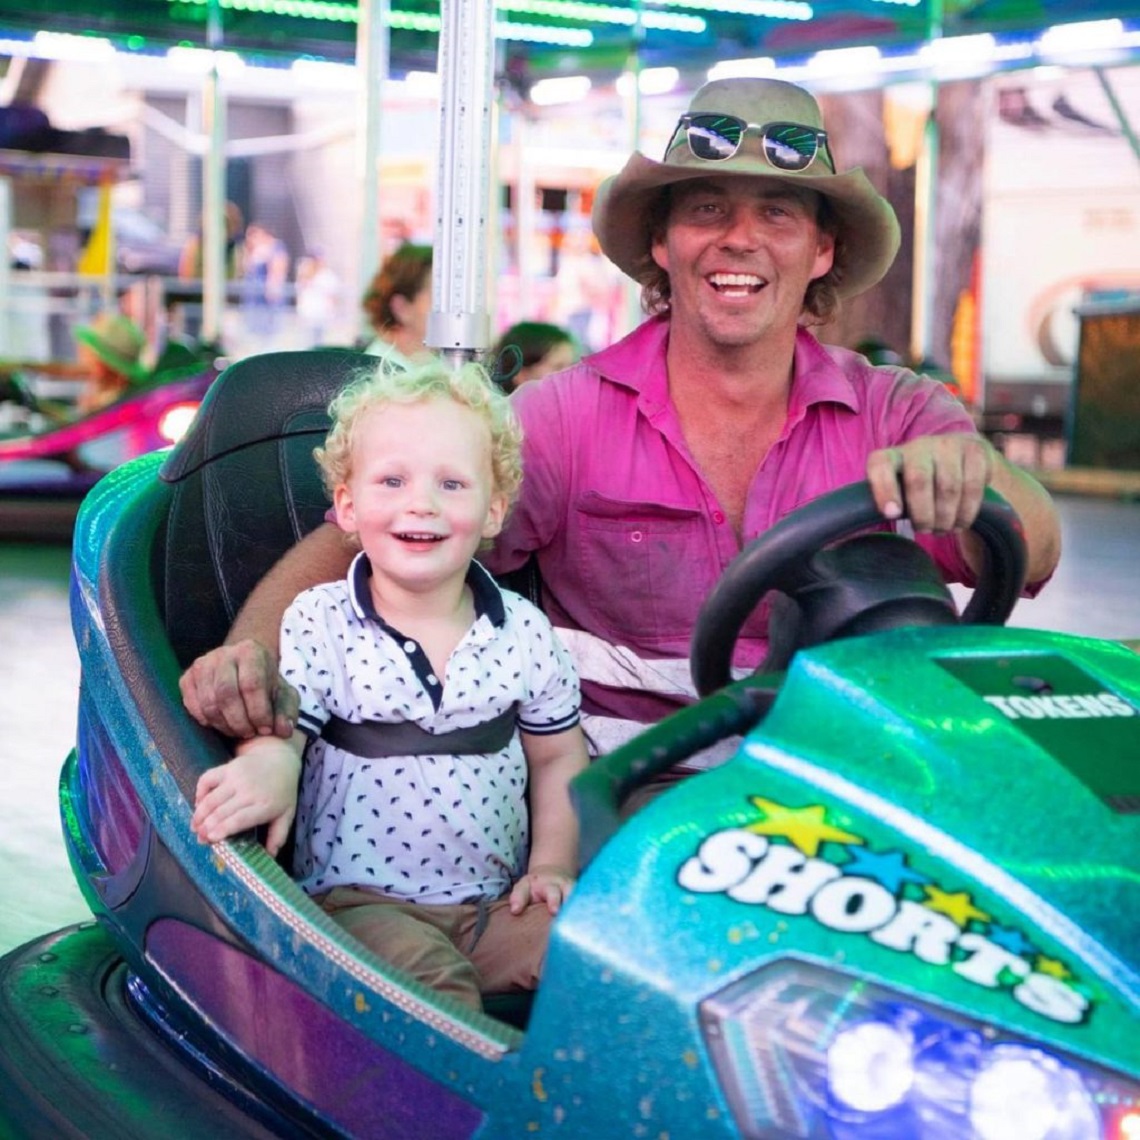 Not the dodgems! Ride insurance issue looms for country shows